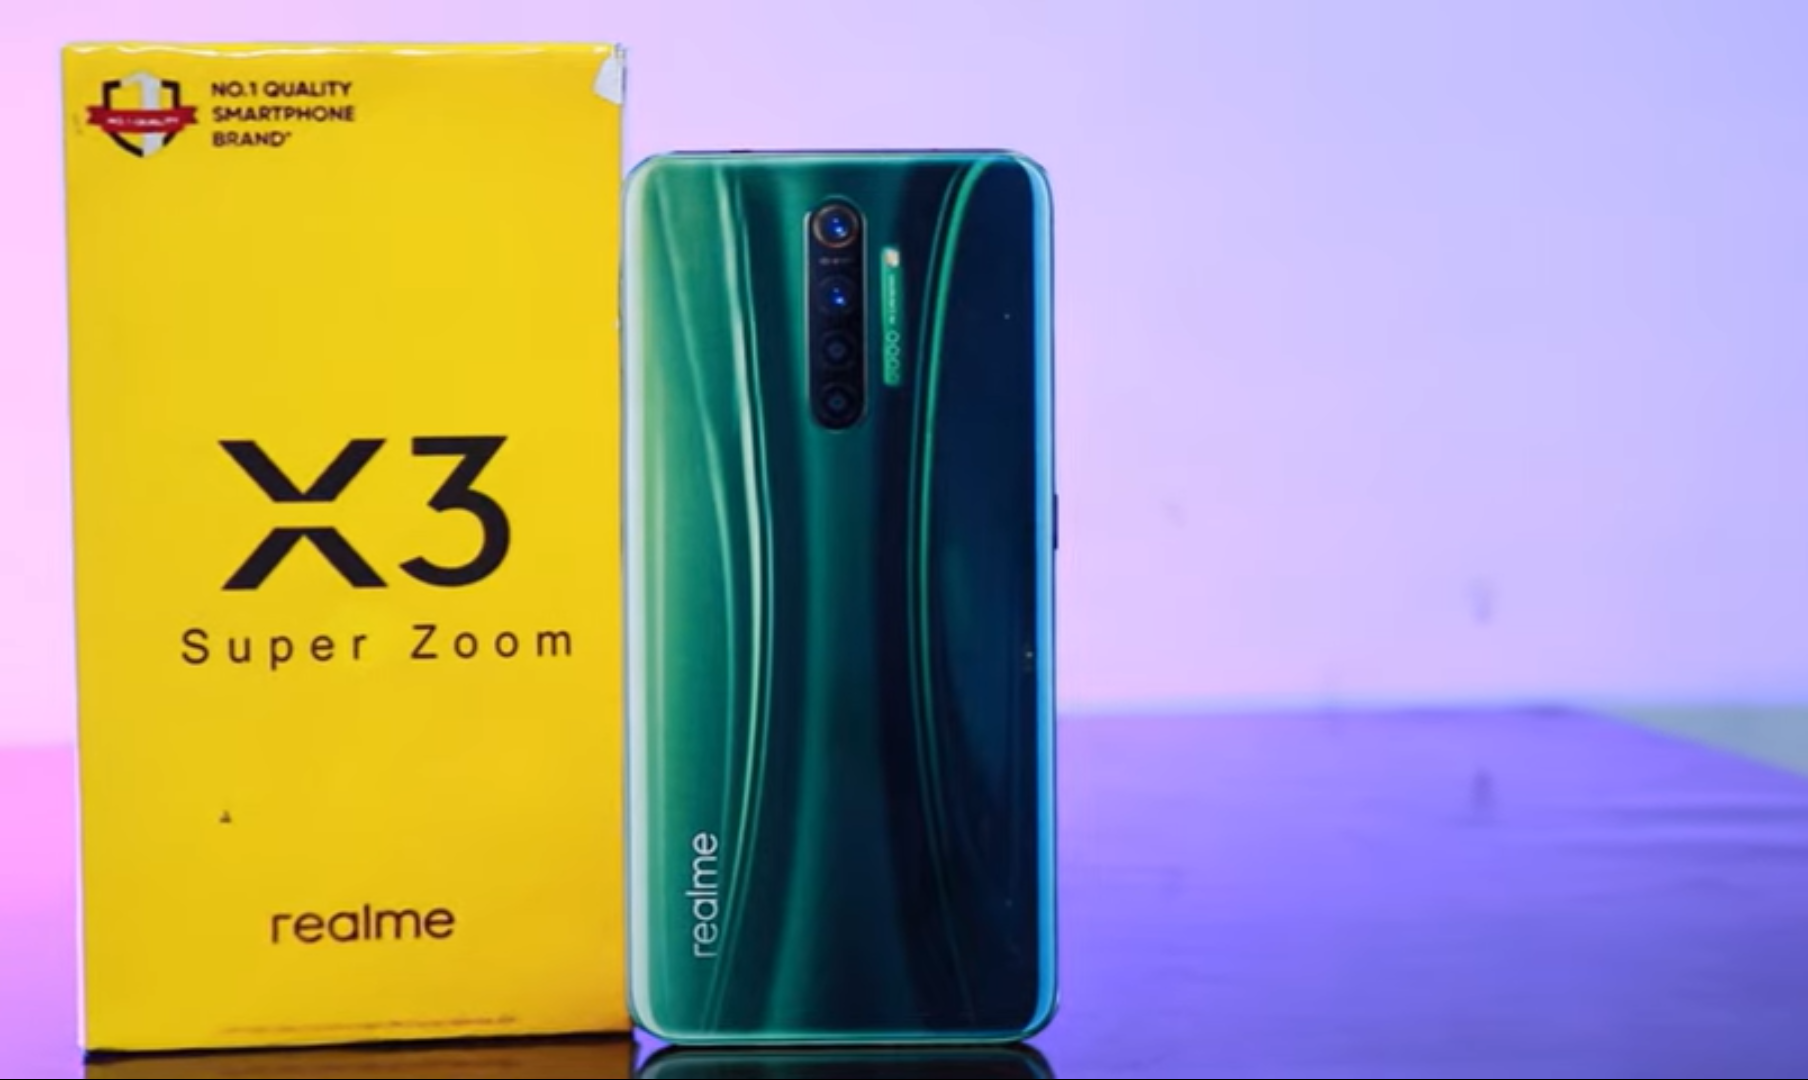 Realme X3 Super Zoom Specification and Price in India